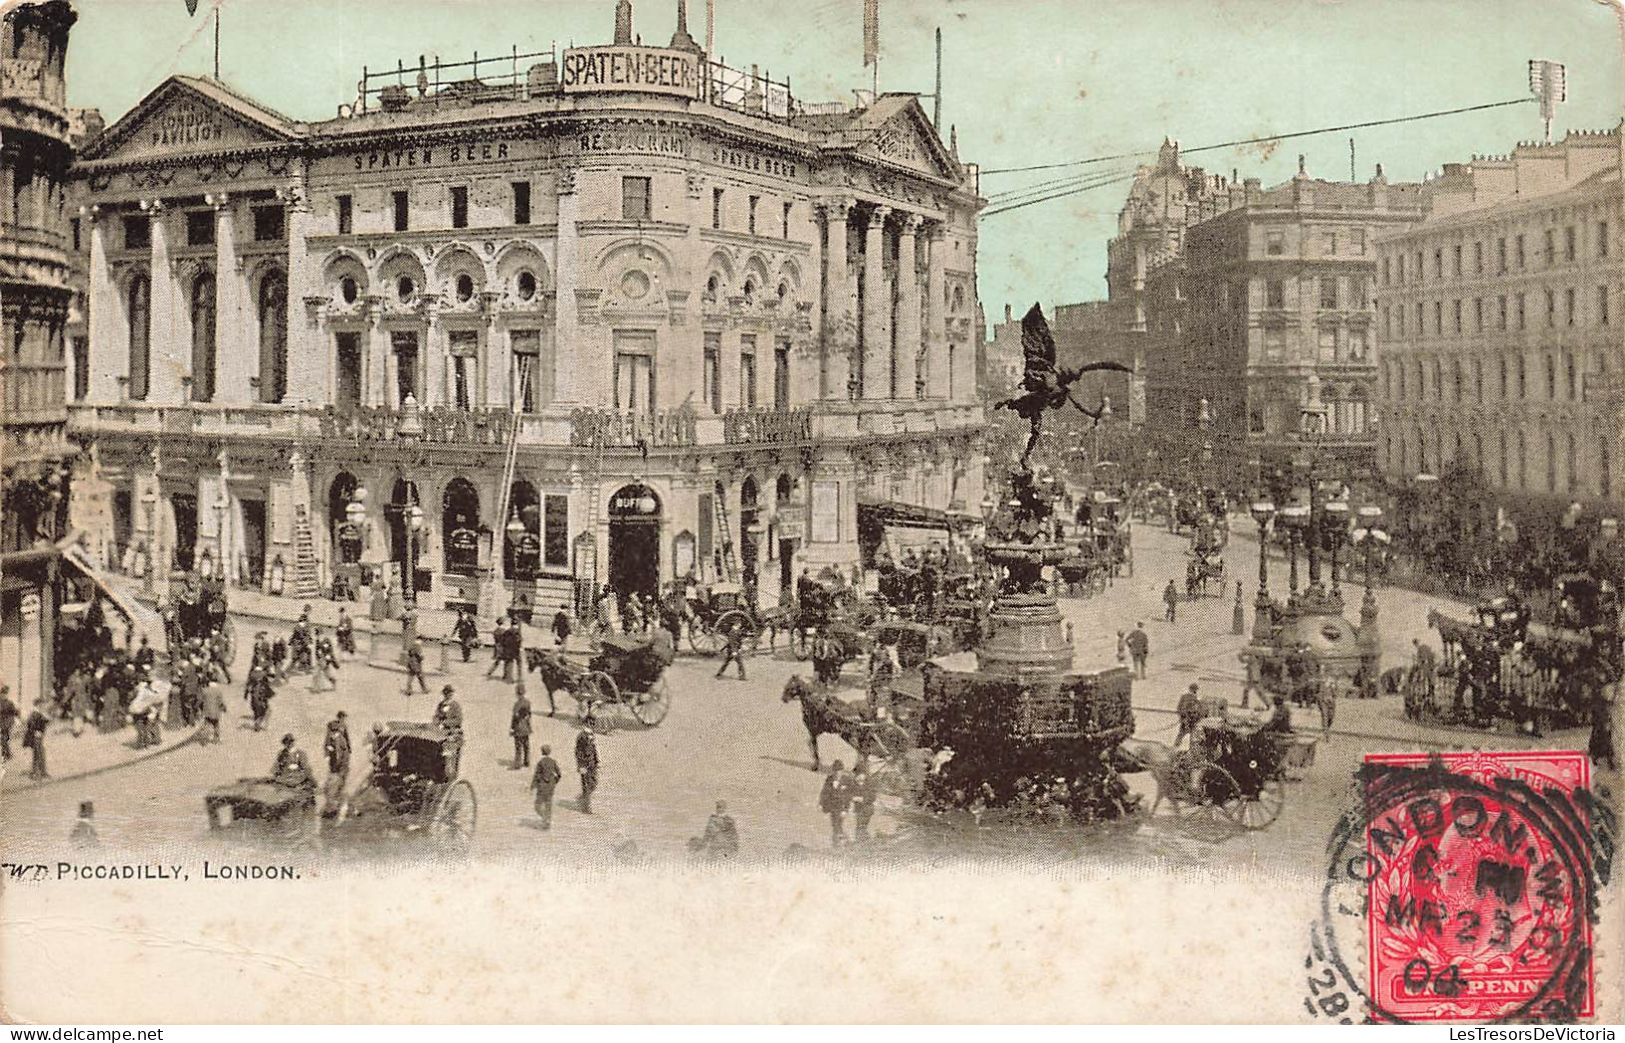 ROYAUME UNI - Angleterre - London - Picadilly - Animé - Voitures - Colorisé - Carte Postale Ancienne - Piccadilly Circus